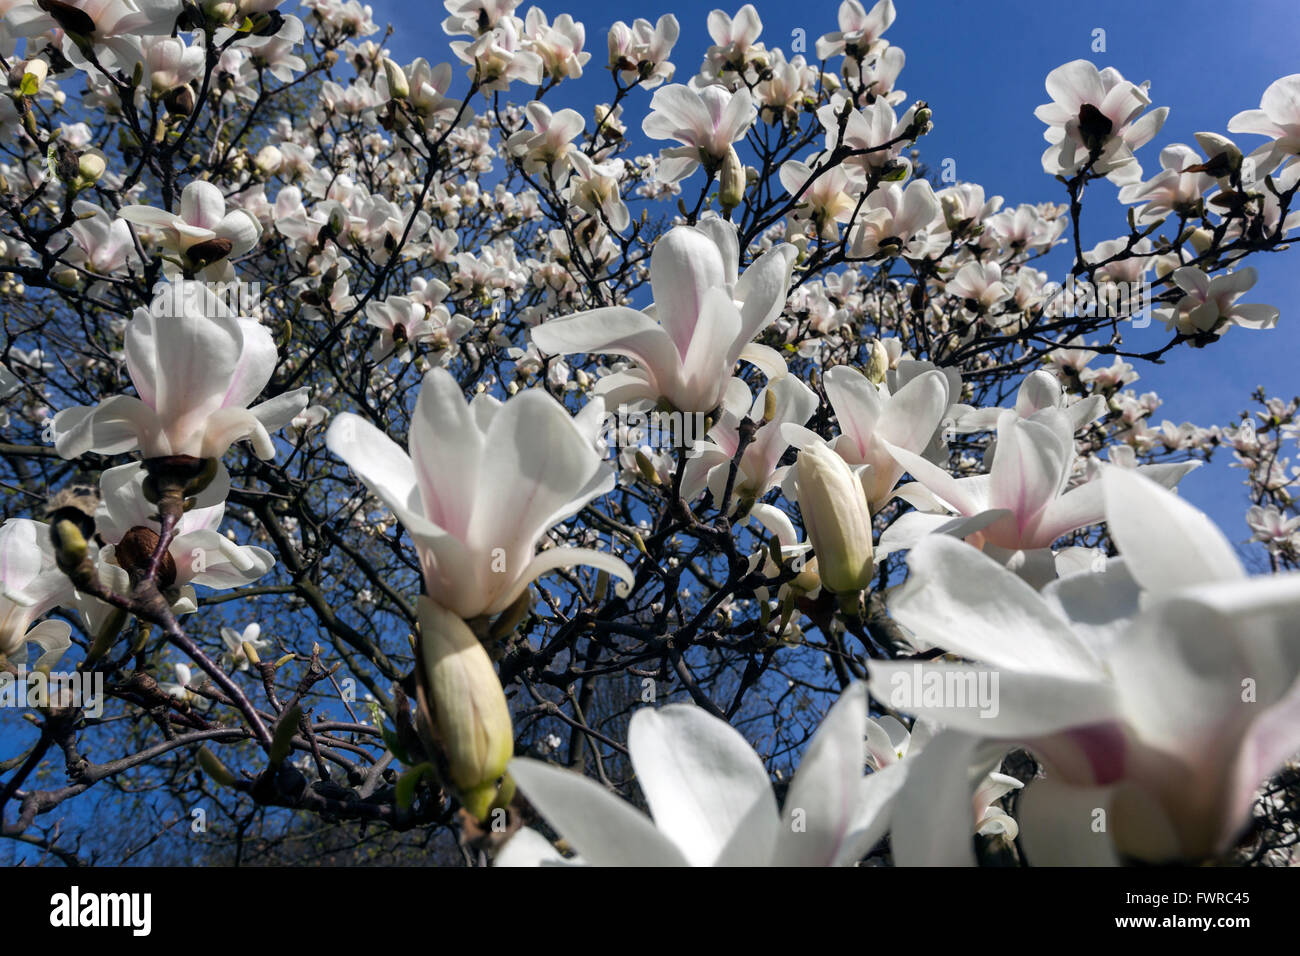 Magnolia tree blossoms White flowers on the branches blooming in early spring garden against the blue sky Stock Photo